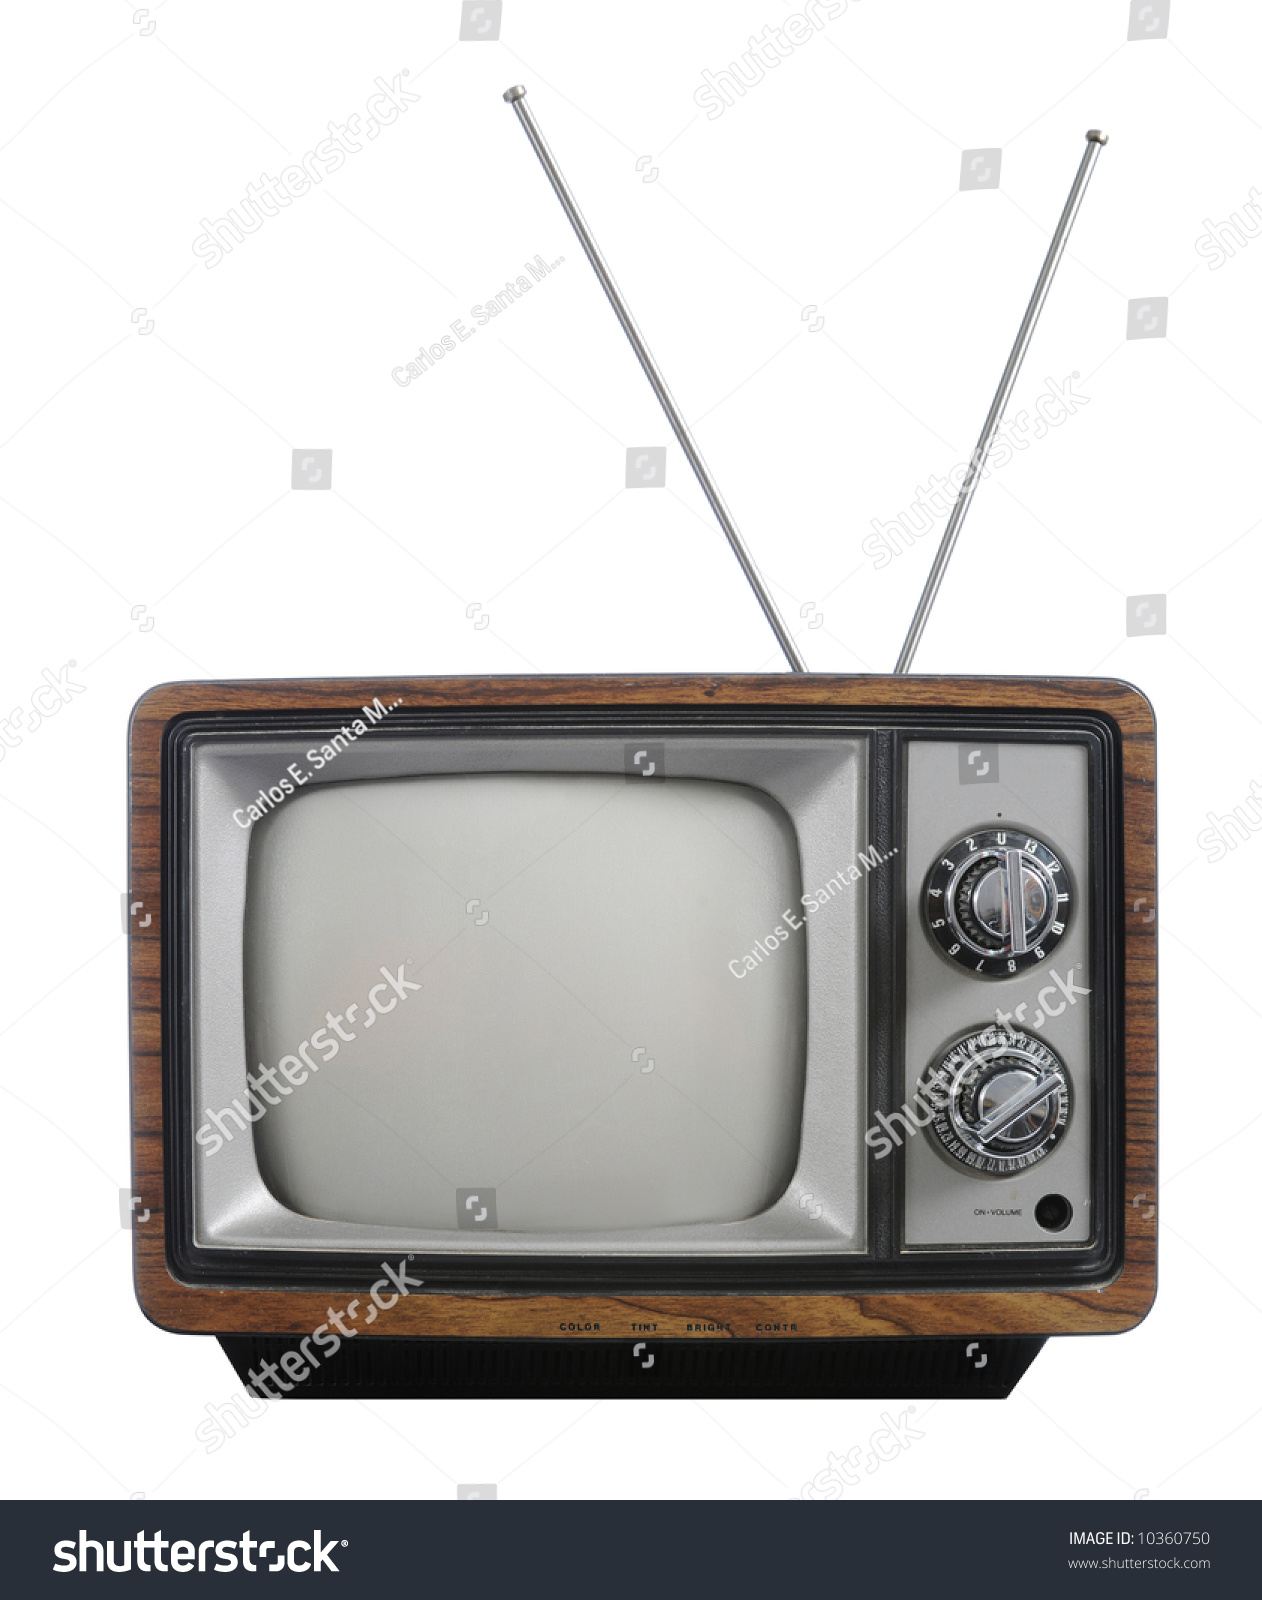 Grunge vintage television with antenna isolated on white #10360750